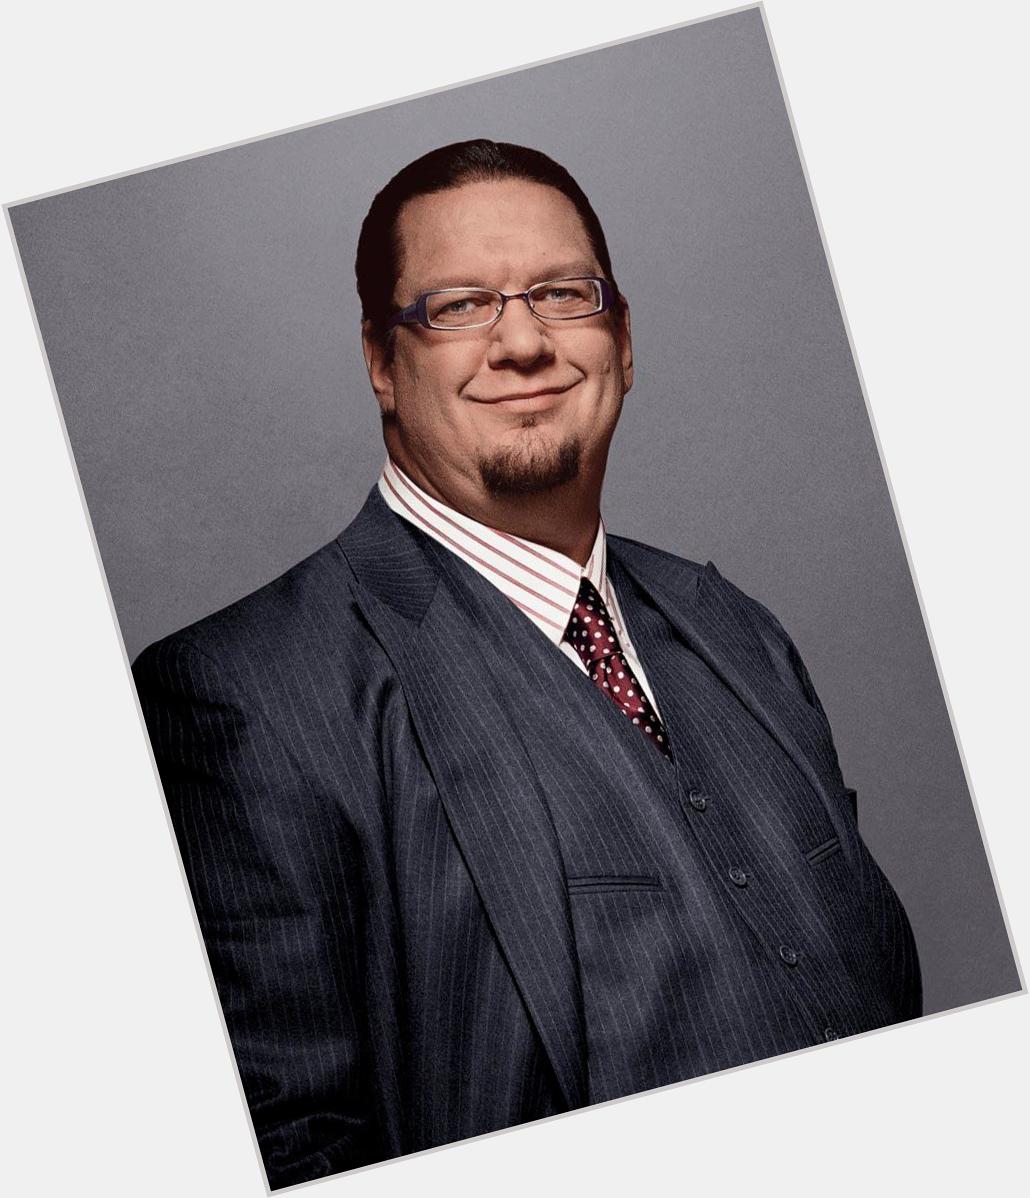 Happy Birthday to Penn Jillette, who turns 60 today! 